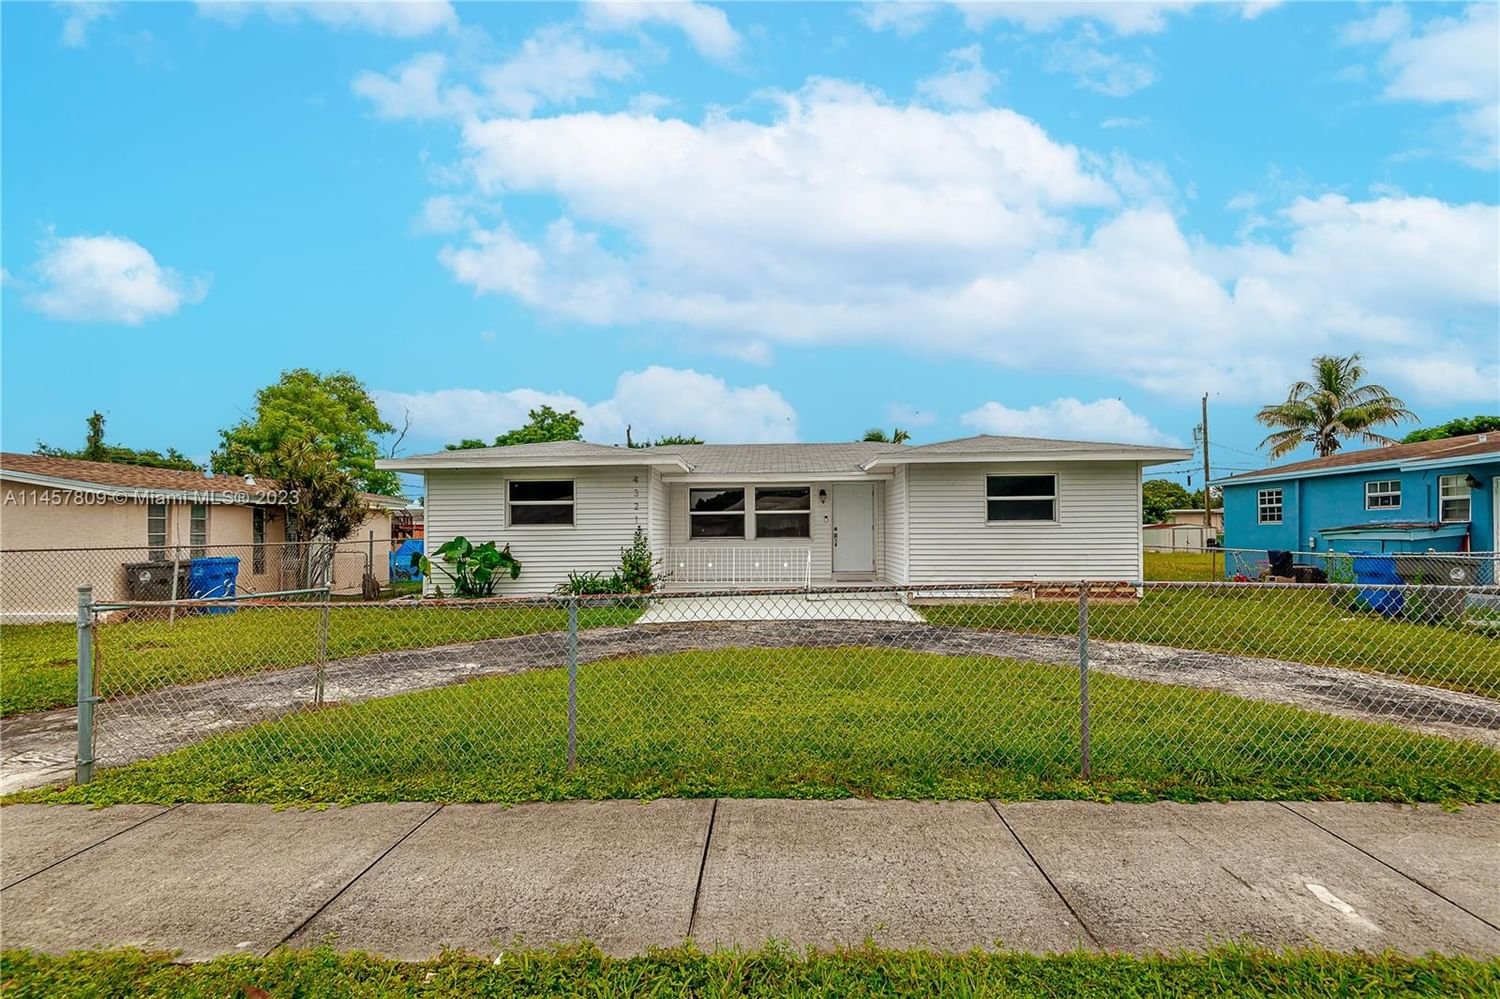 Real estate property located at 4321 26th St, Broward County, West Park, FL